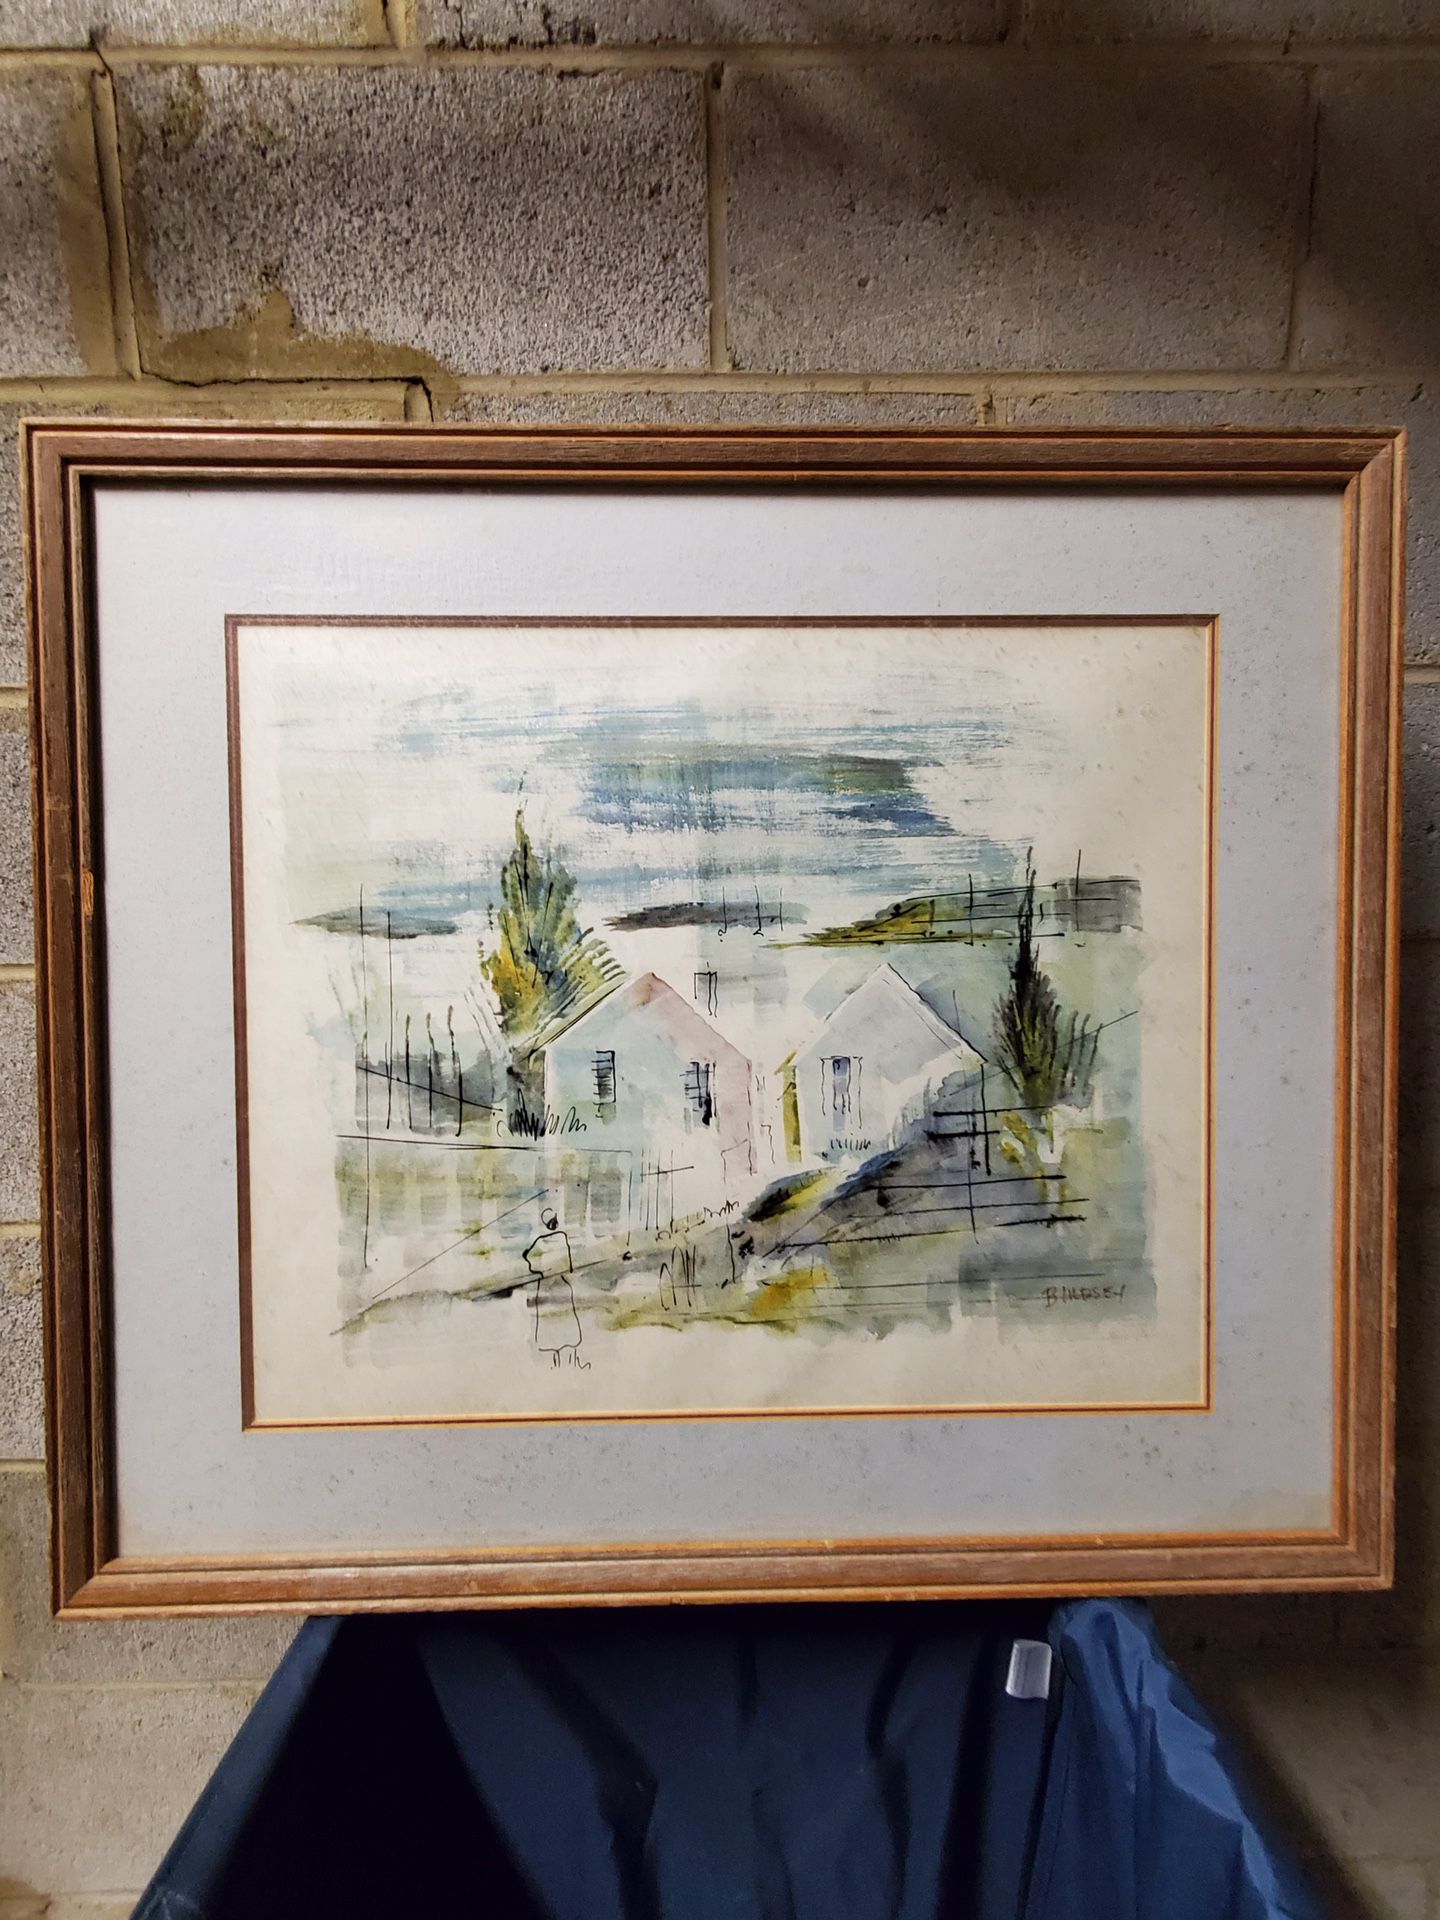 Signed ORIGINAL WATERCOLOR PAINTING - firm price.